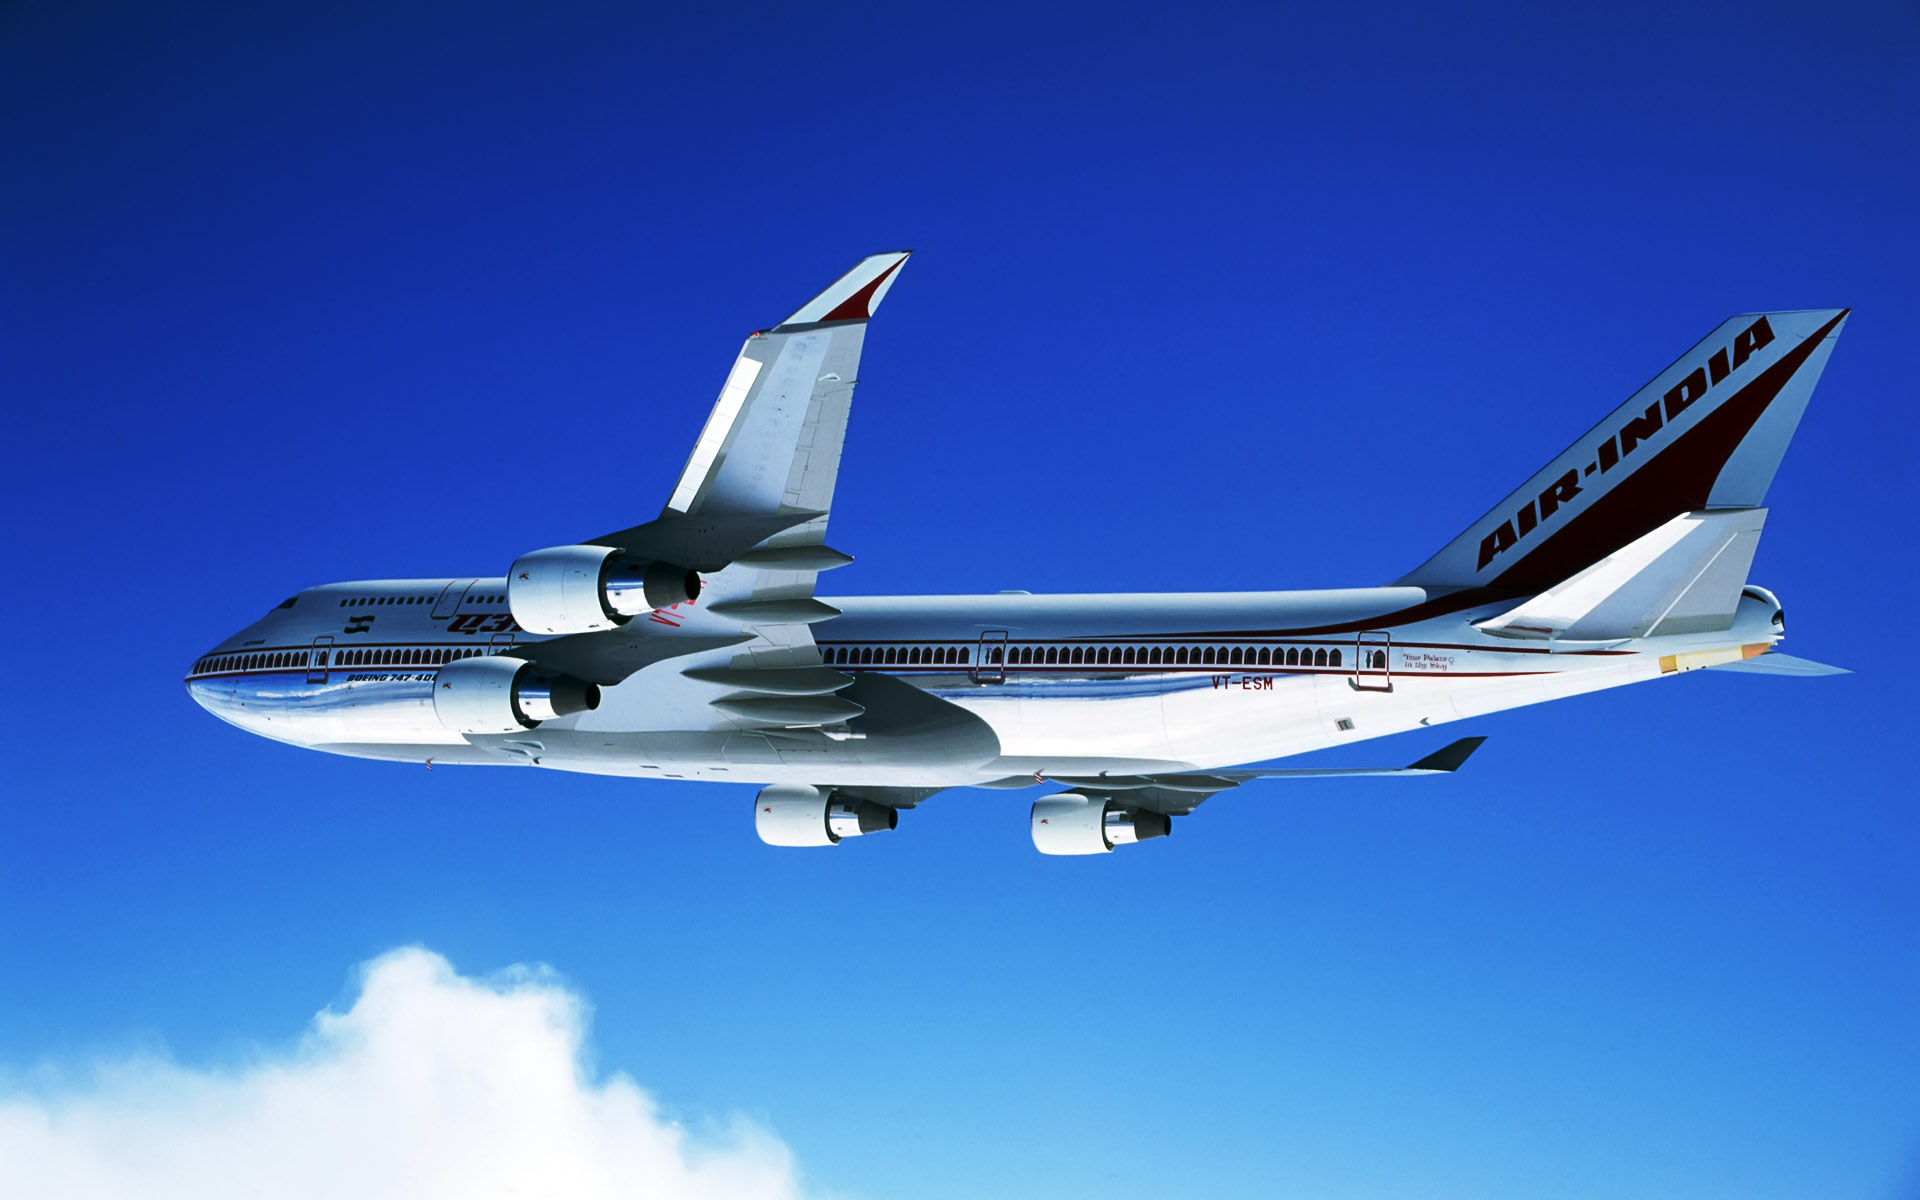 Indian Airlines wallpapers and images - wallpapers ...